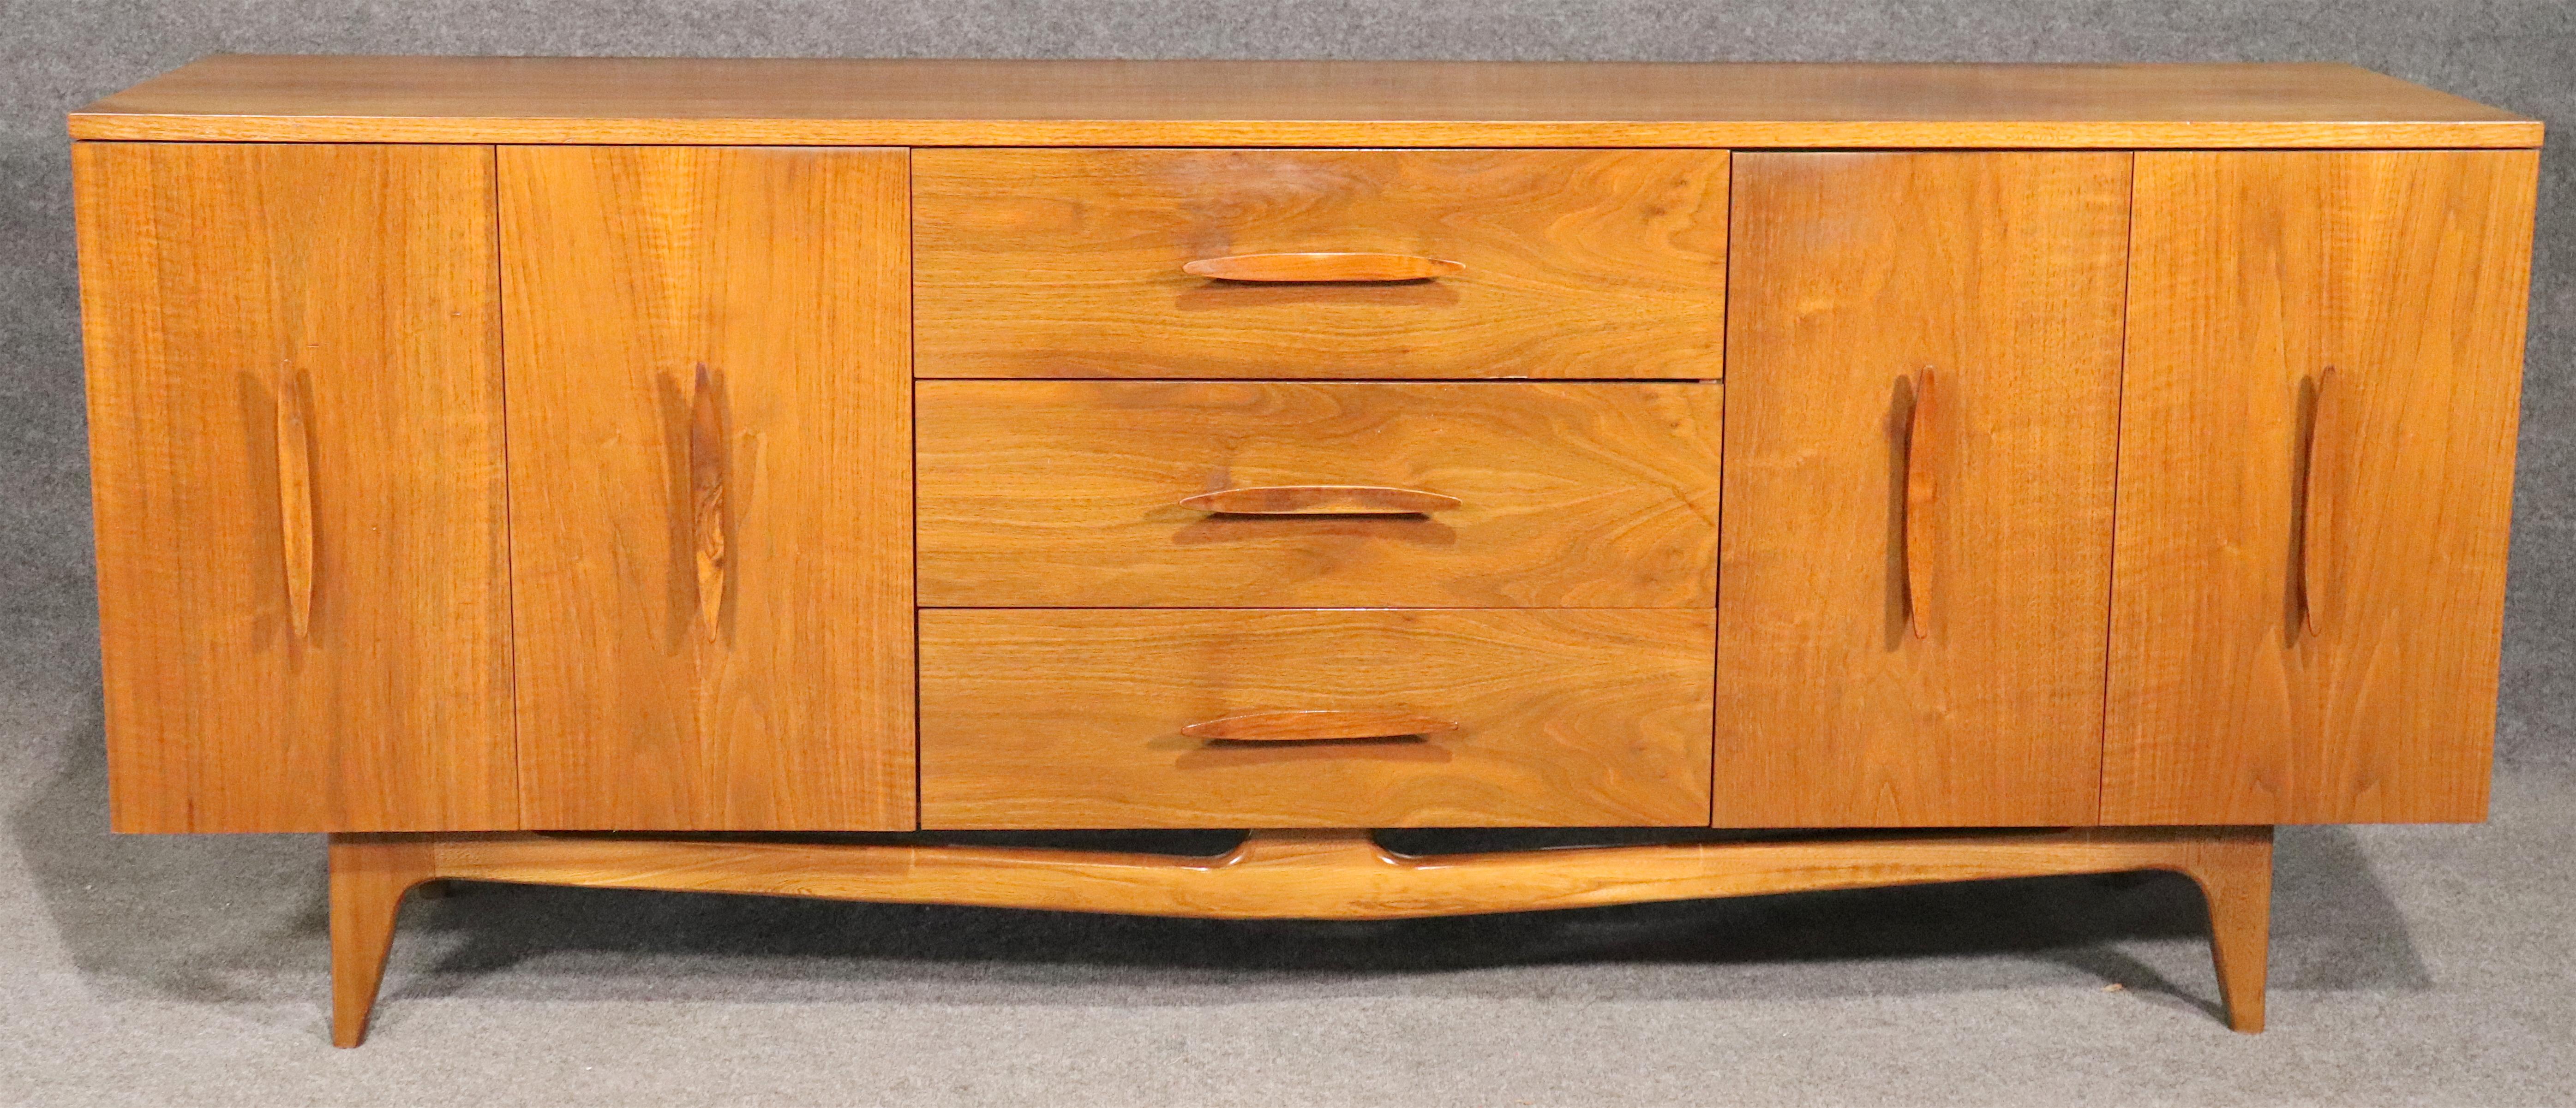 Long Mid-Century Modern American dresser with warm walnut grain and curved wood handles. Nine wide drawers offer ample bedroom storage.
Please confirm location.